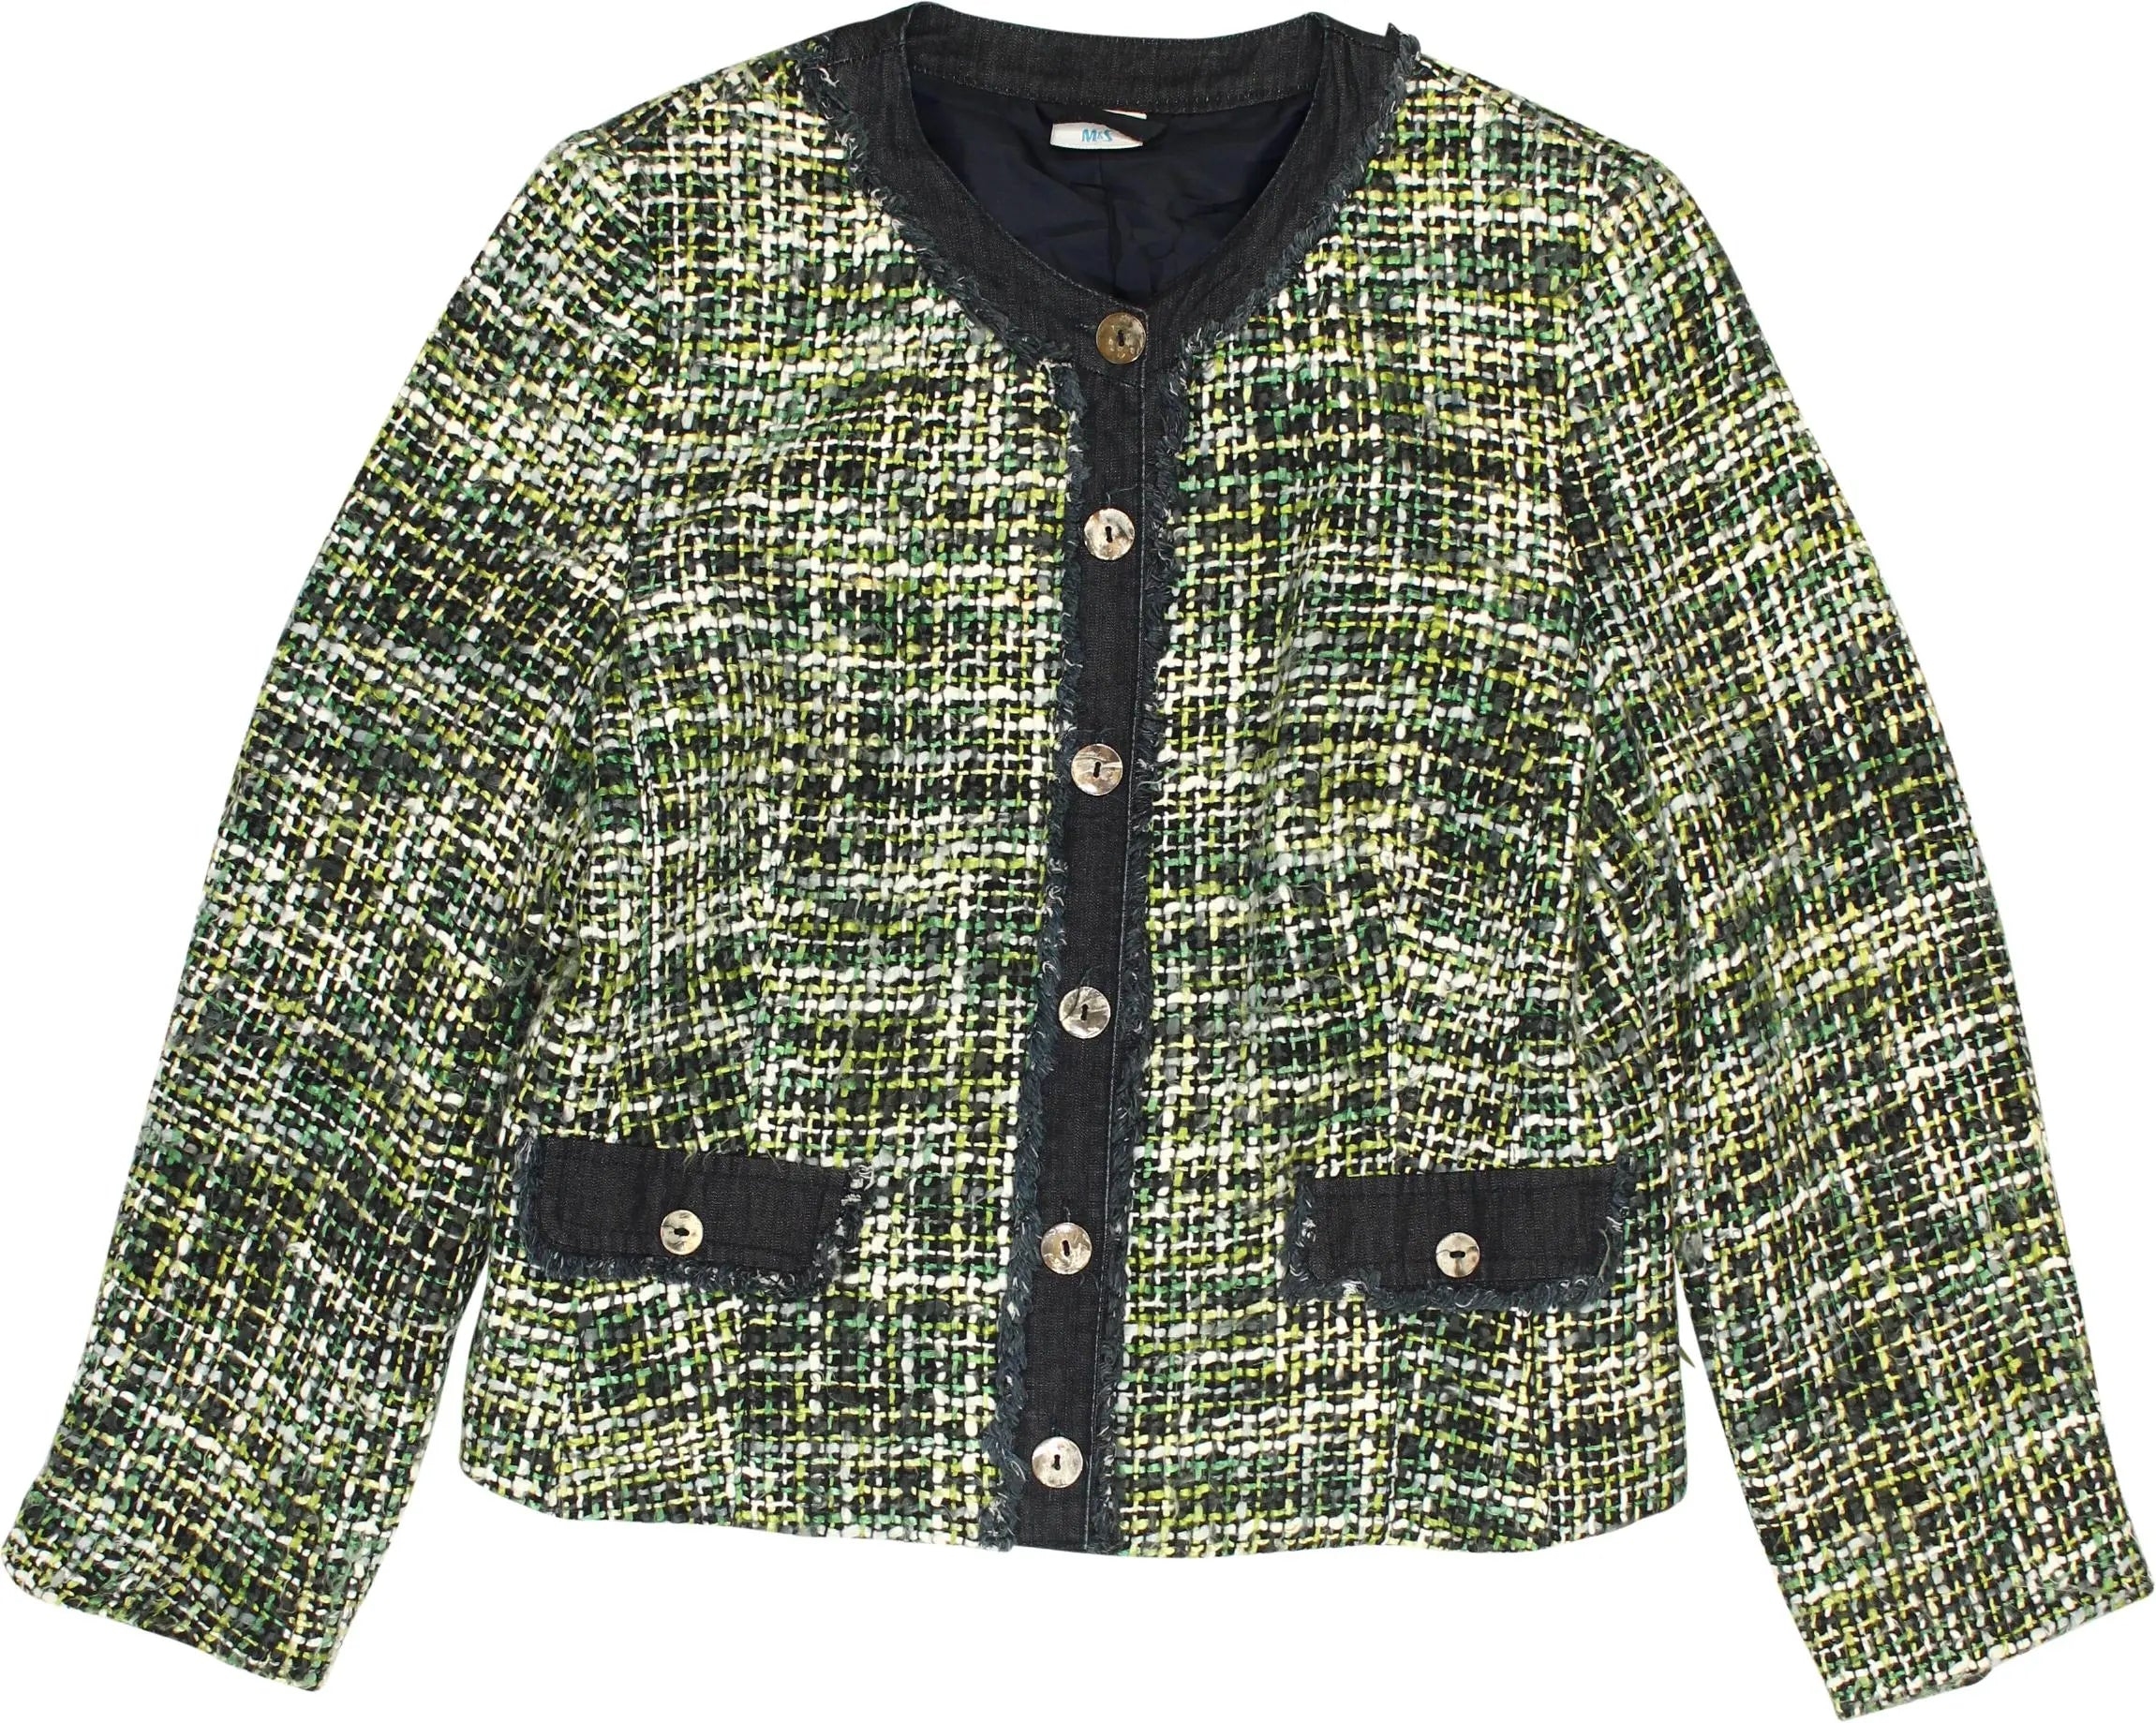 M&S - Jacket- ThriftTale.com - Vintage and second handclothing